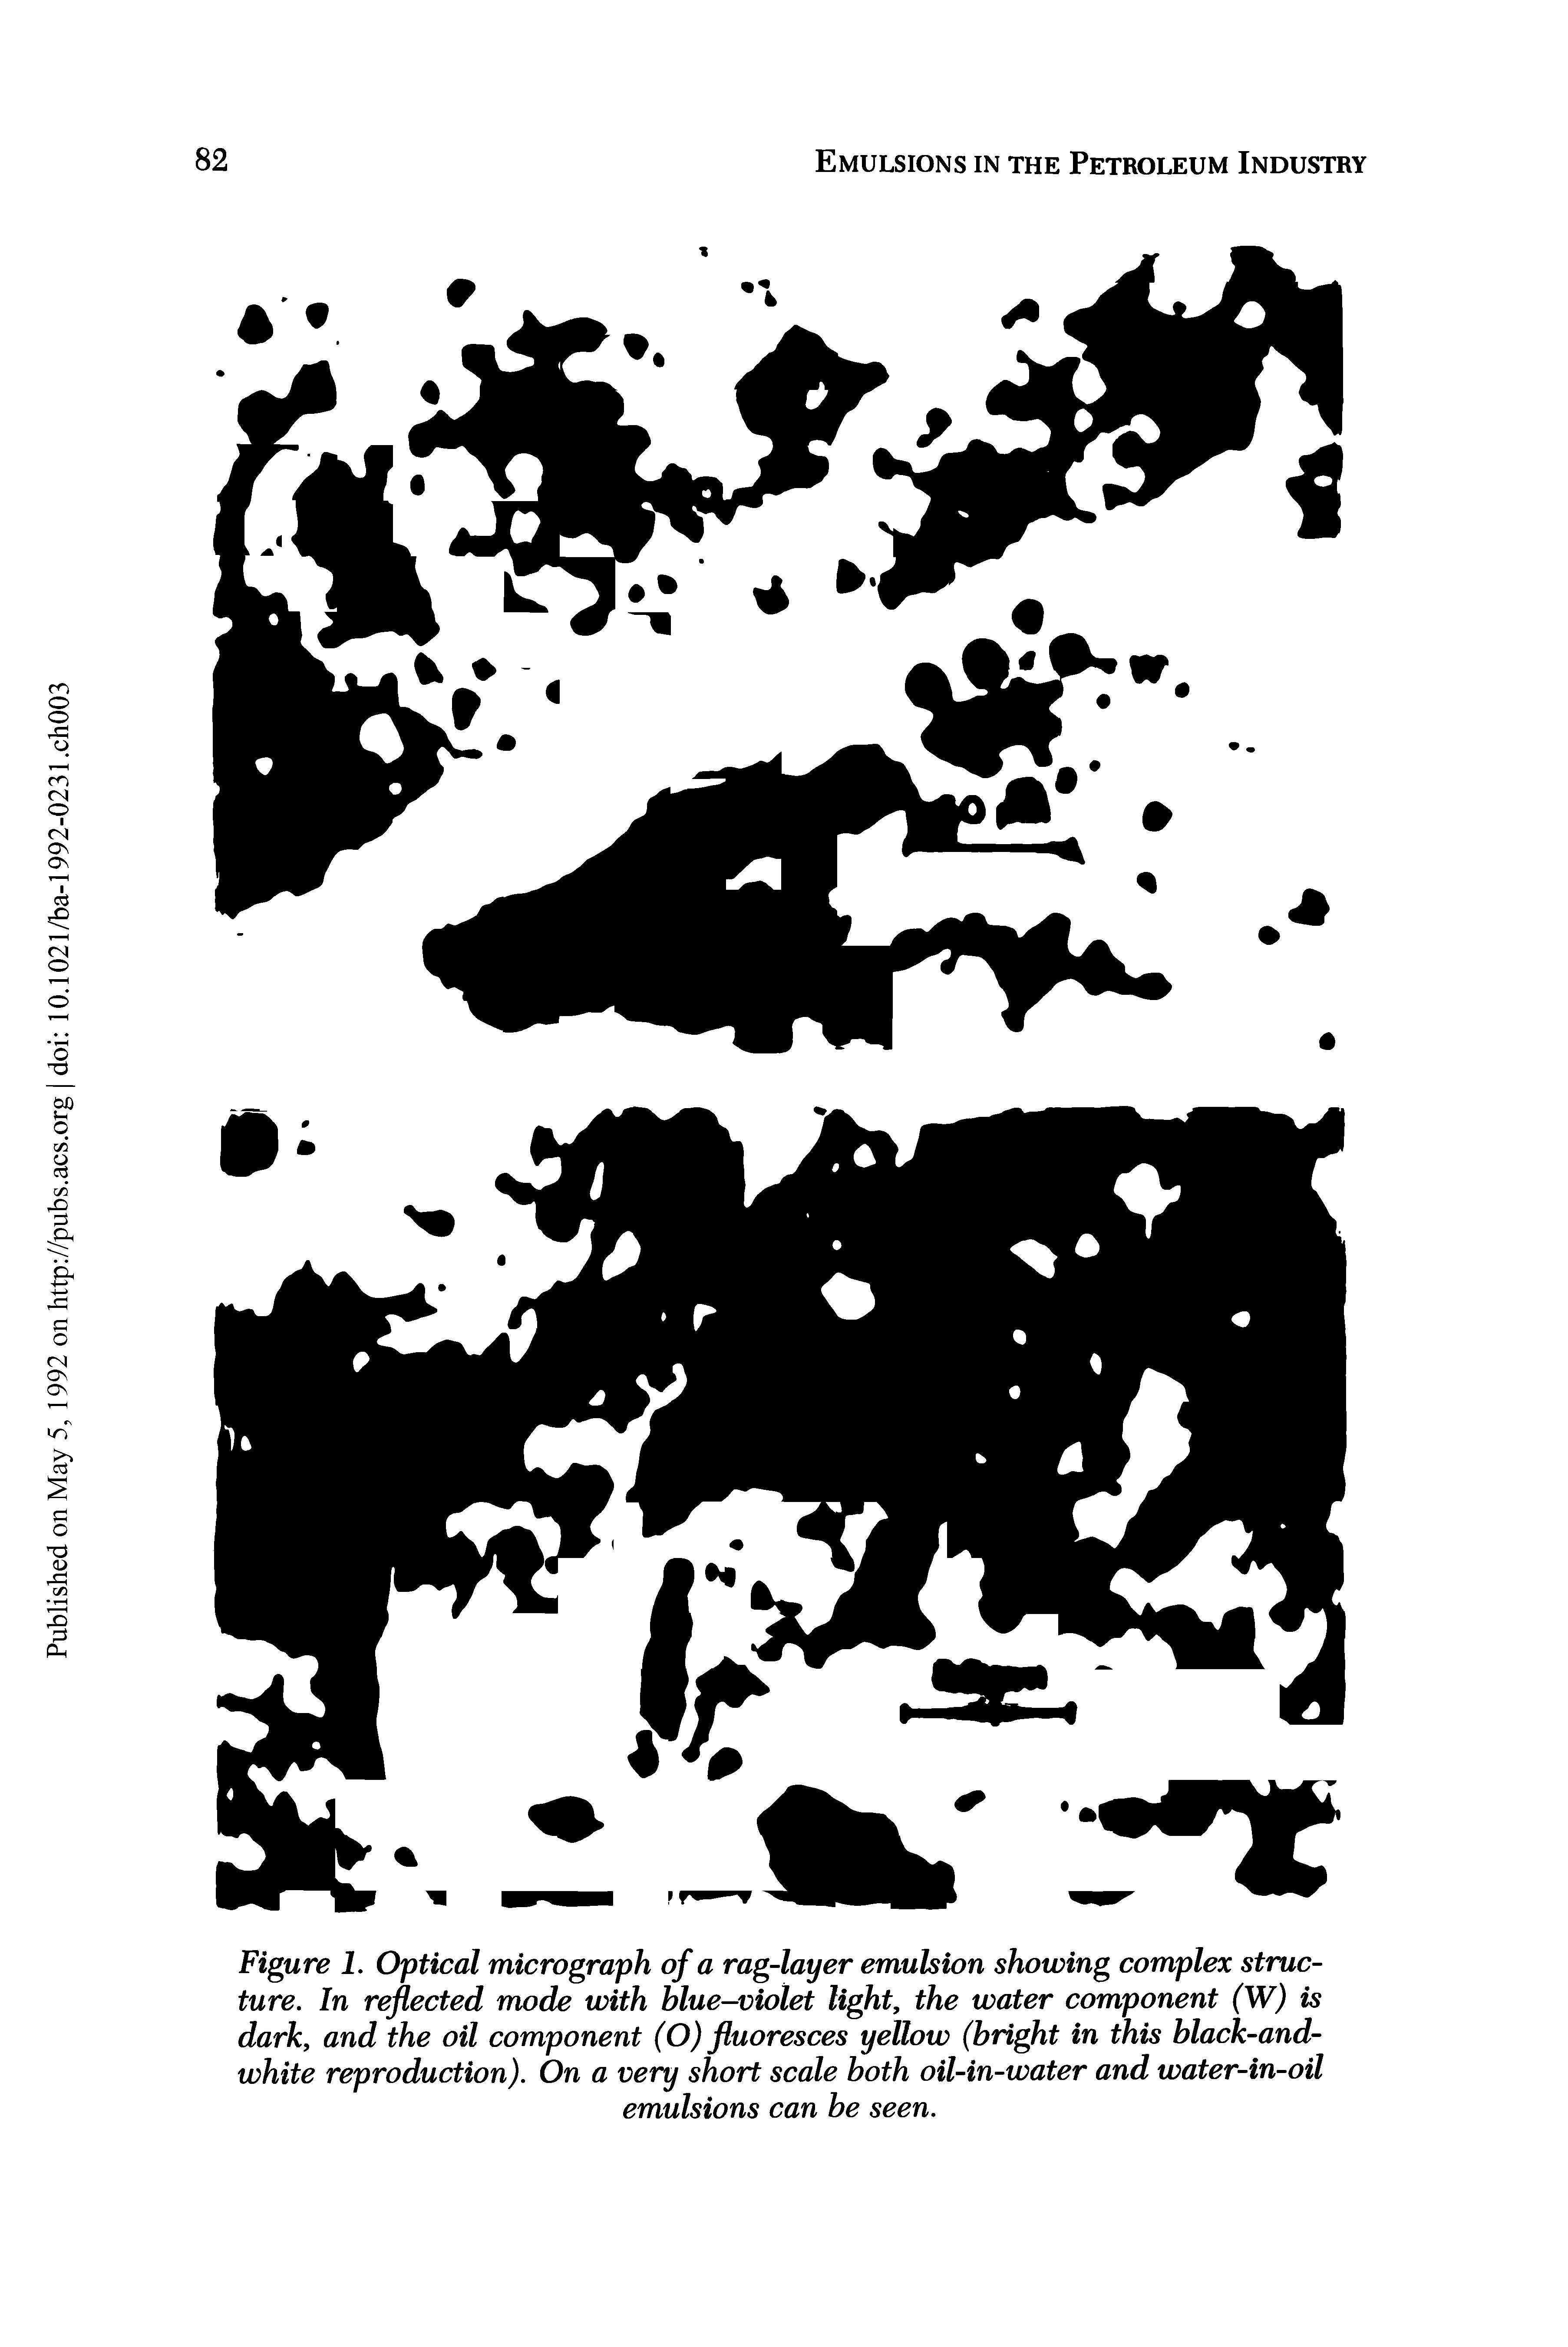 Figure 1. Optical micrograph of a rag-layer emulsion showing complex structure. In reflected mode with blue-violet light, the water component (W) is dark, and the oil component (O) fluoresces yellow (bright in this black-and-white reproduction). On a very short scale both oil-in-water and water-in-oil emulsions can be seen.